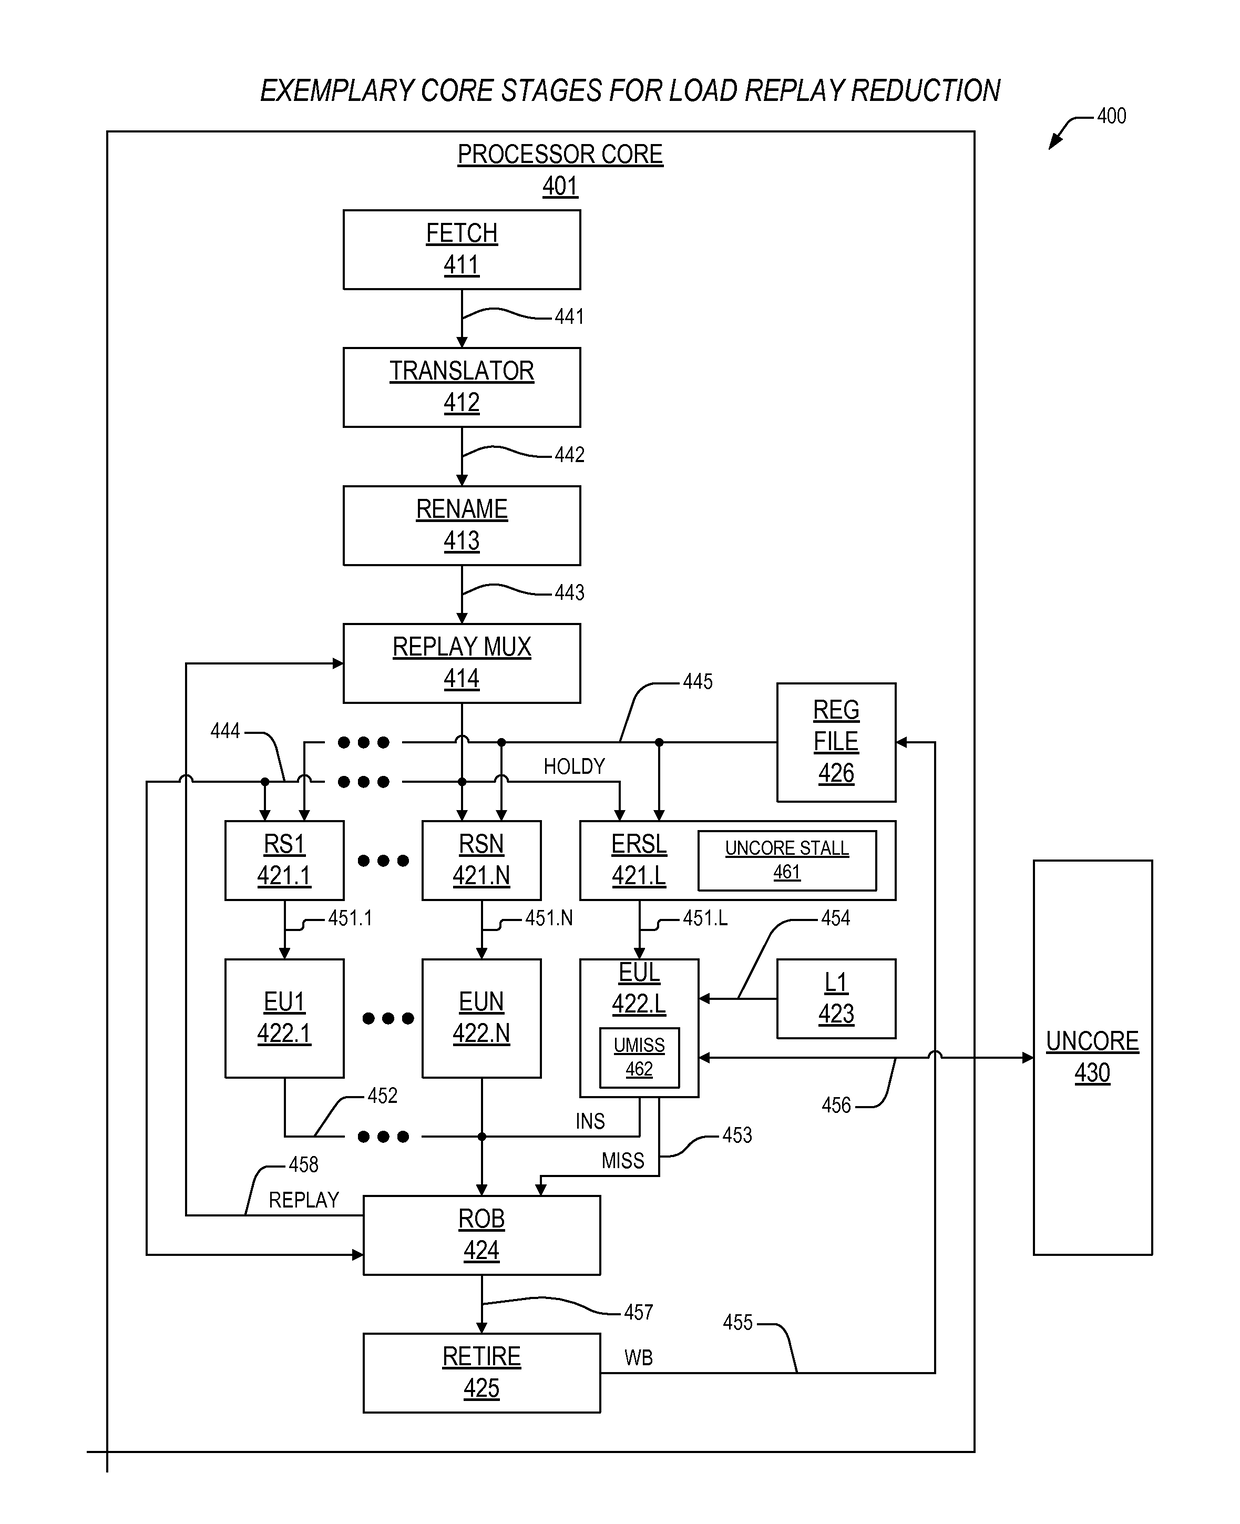 Mechanism to preclude shared RAM-dependent load replays in an out-of-order processor